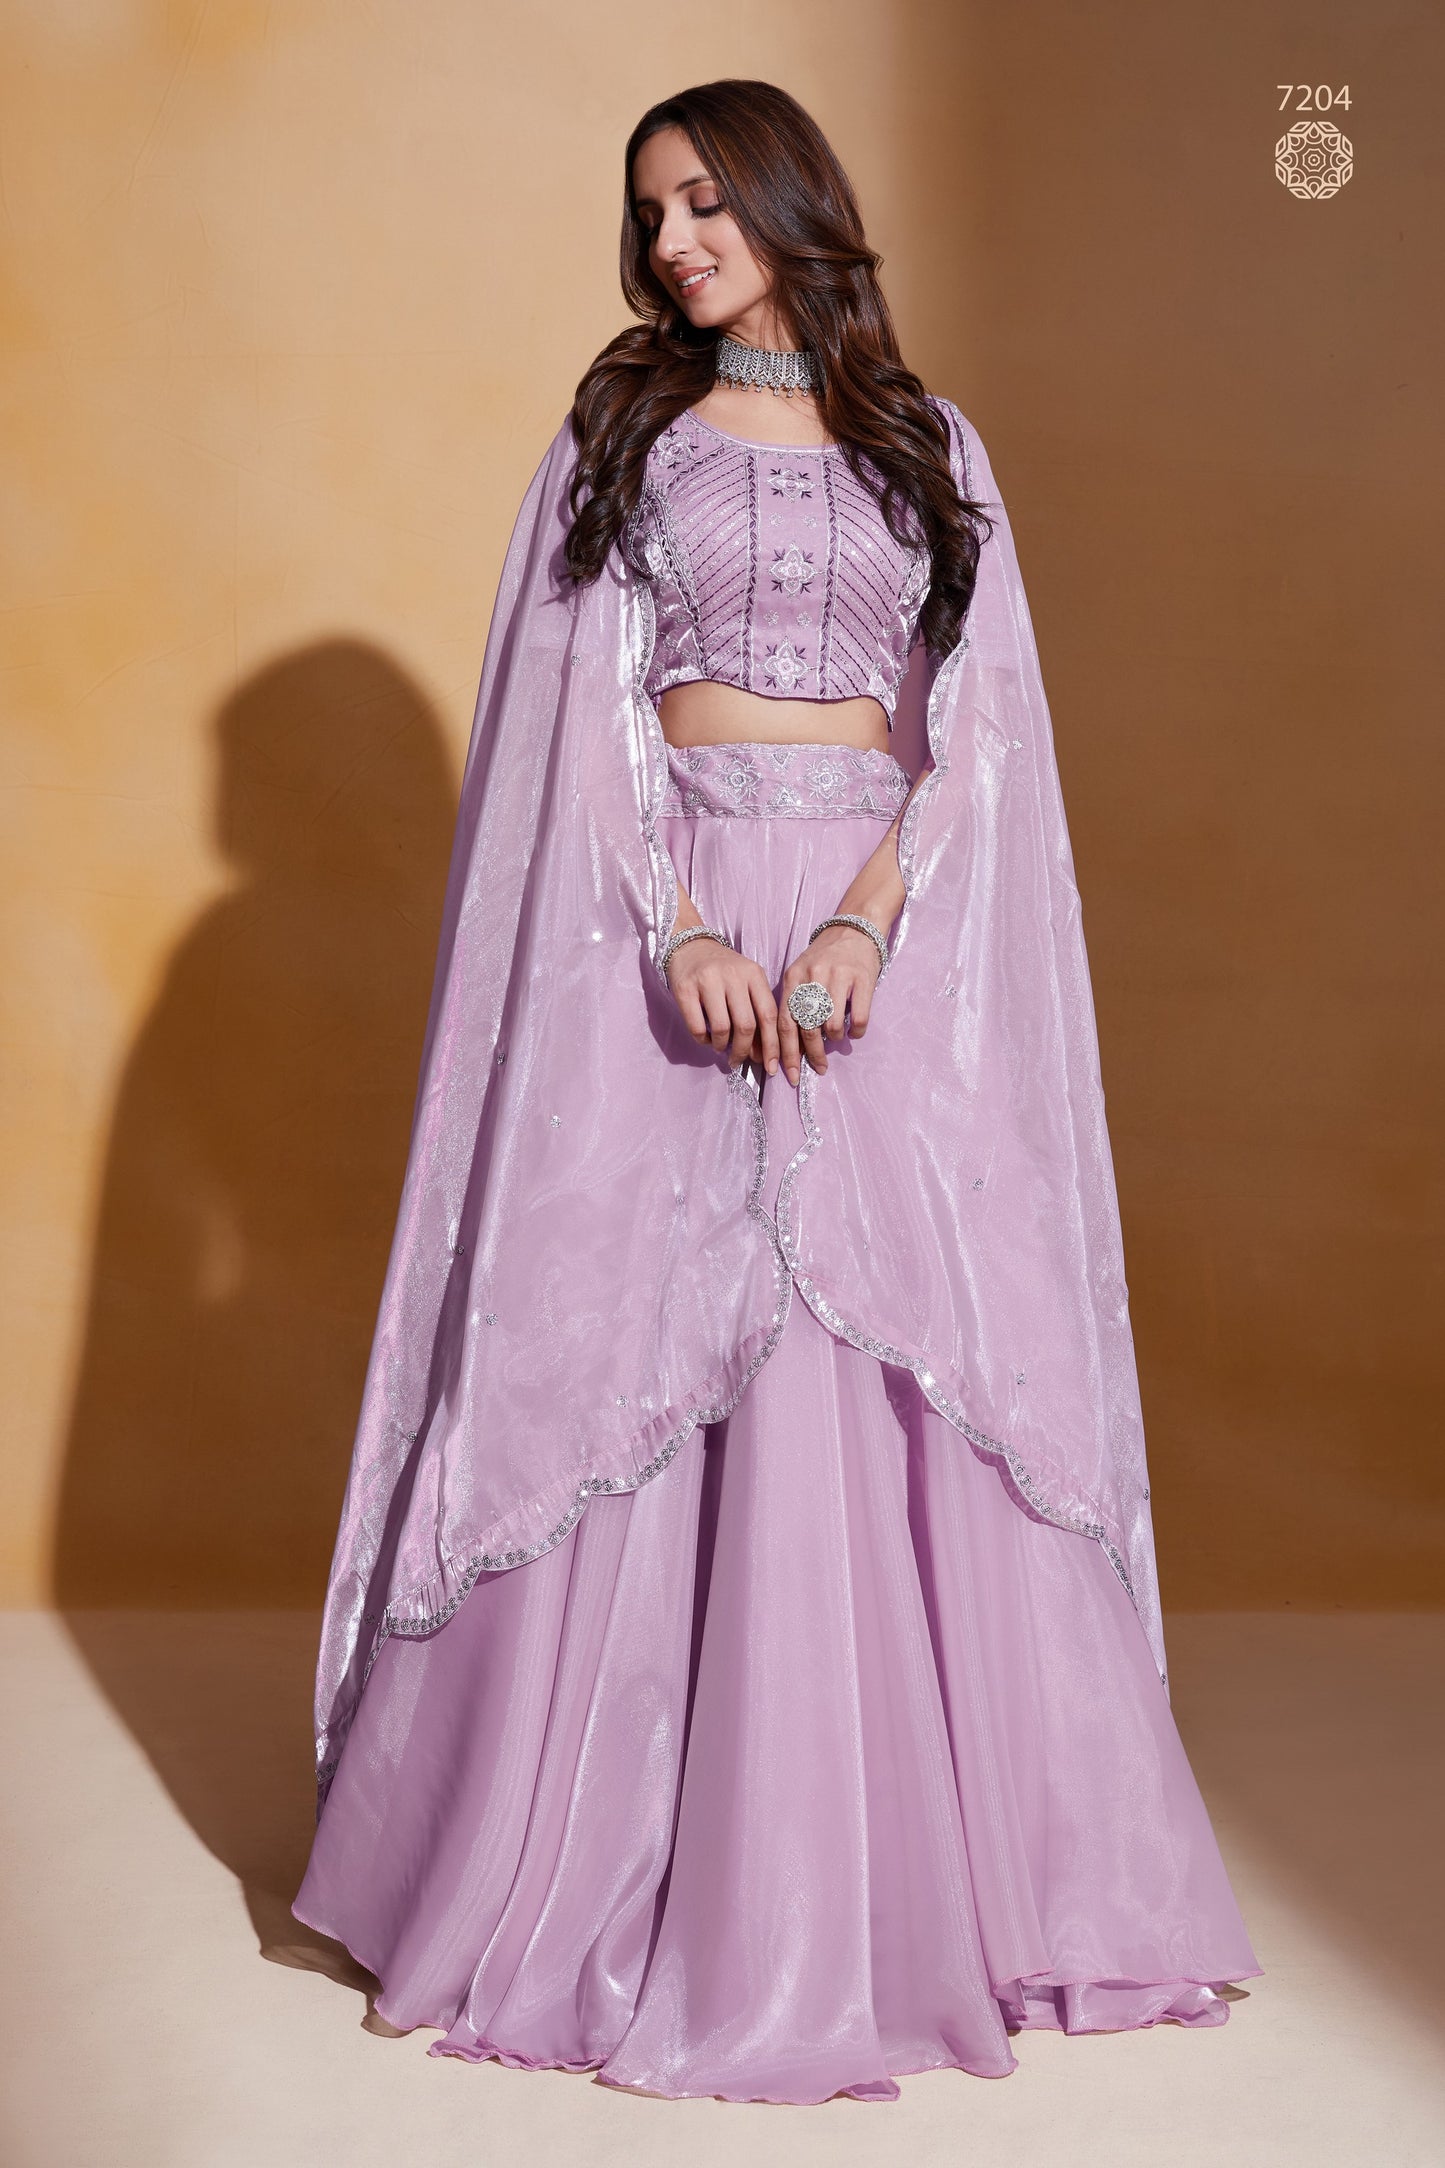 Light Purple Organza Silk Lehenga Choli 18 Meter Flair For Indian Festivals & Weddings - Sequence Embroidery Work, Thread Embroidery Work